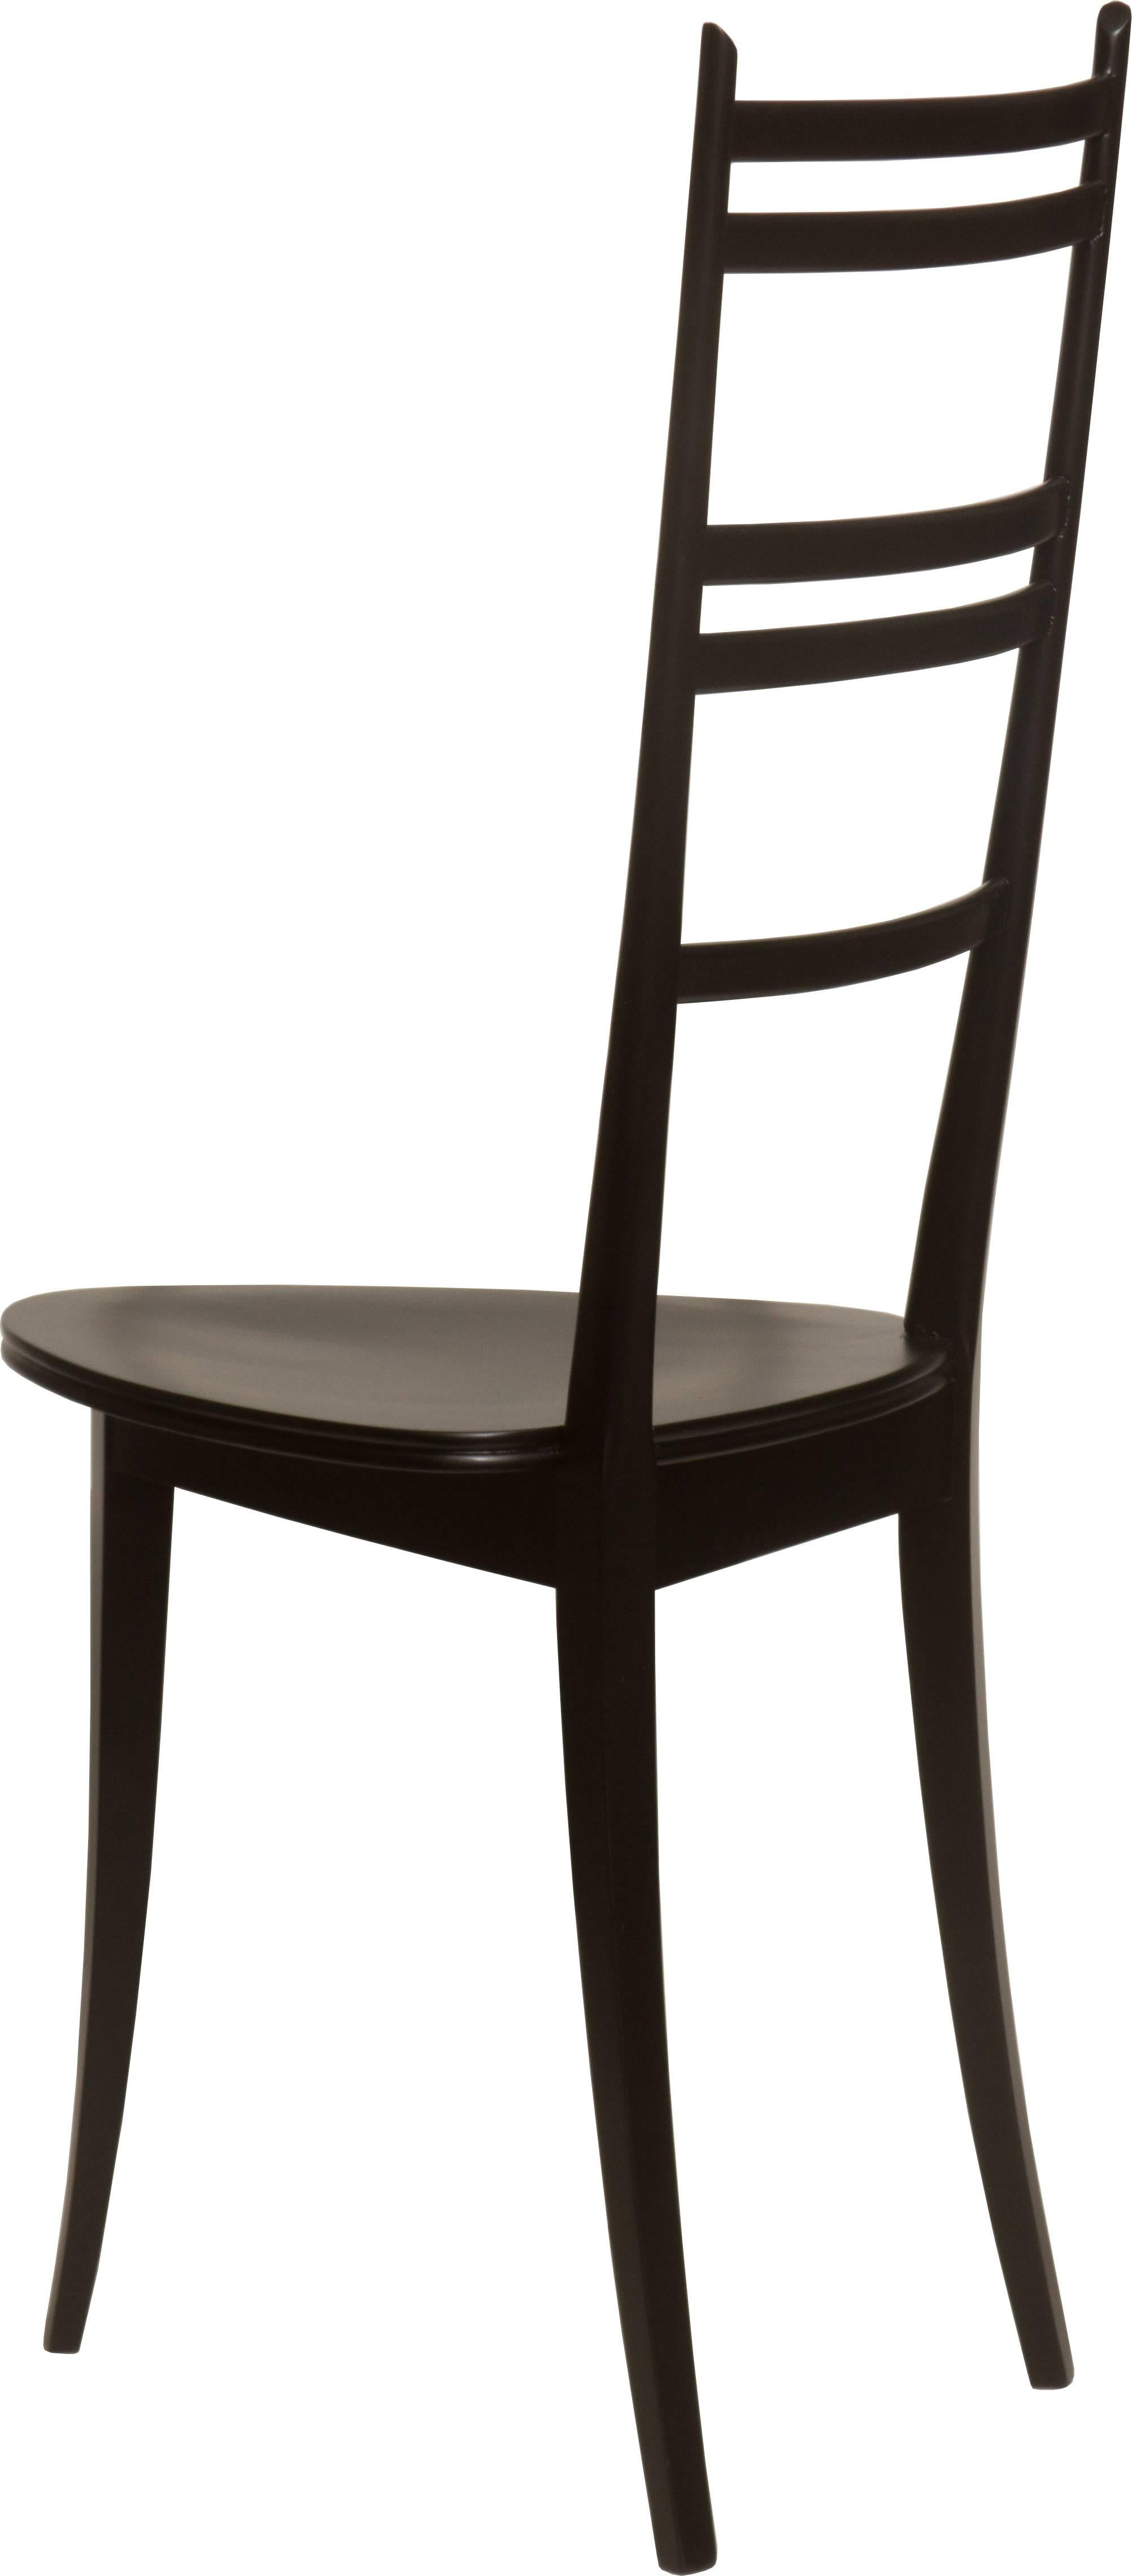 Italian Three Legged Chair In Excellent Condition For Sale In Chicago, IL